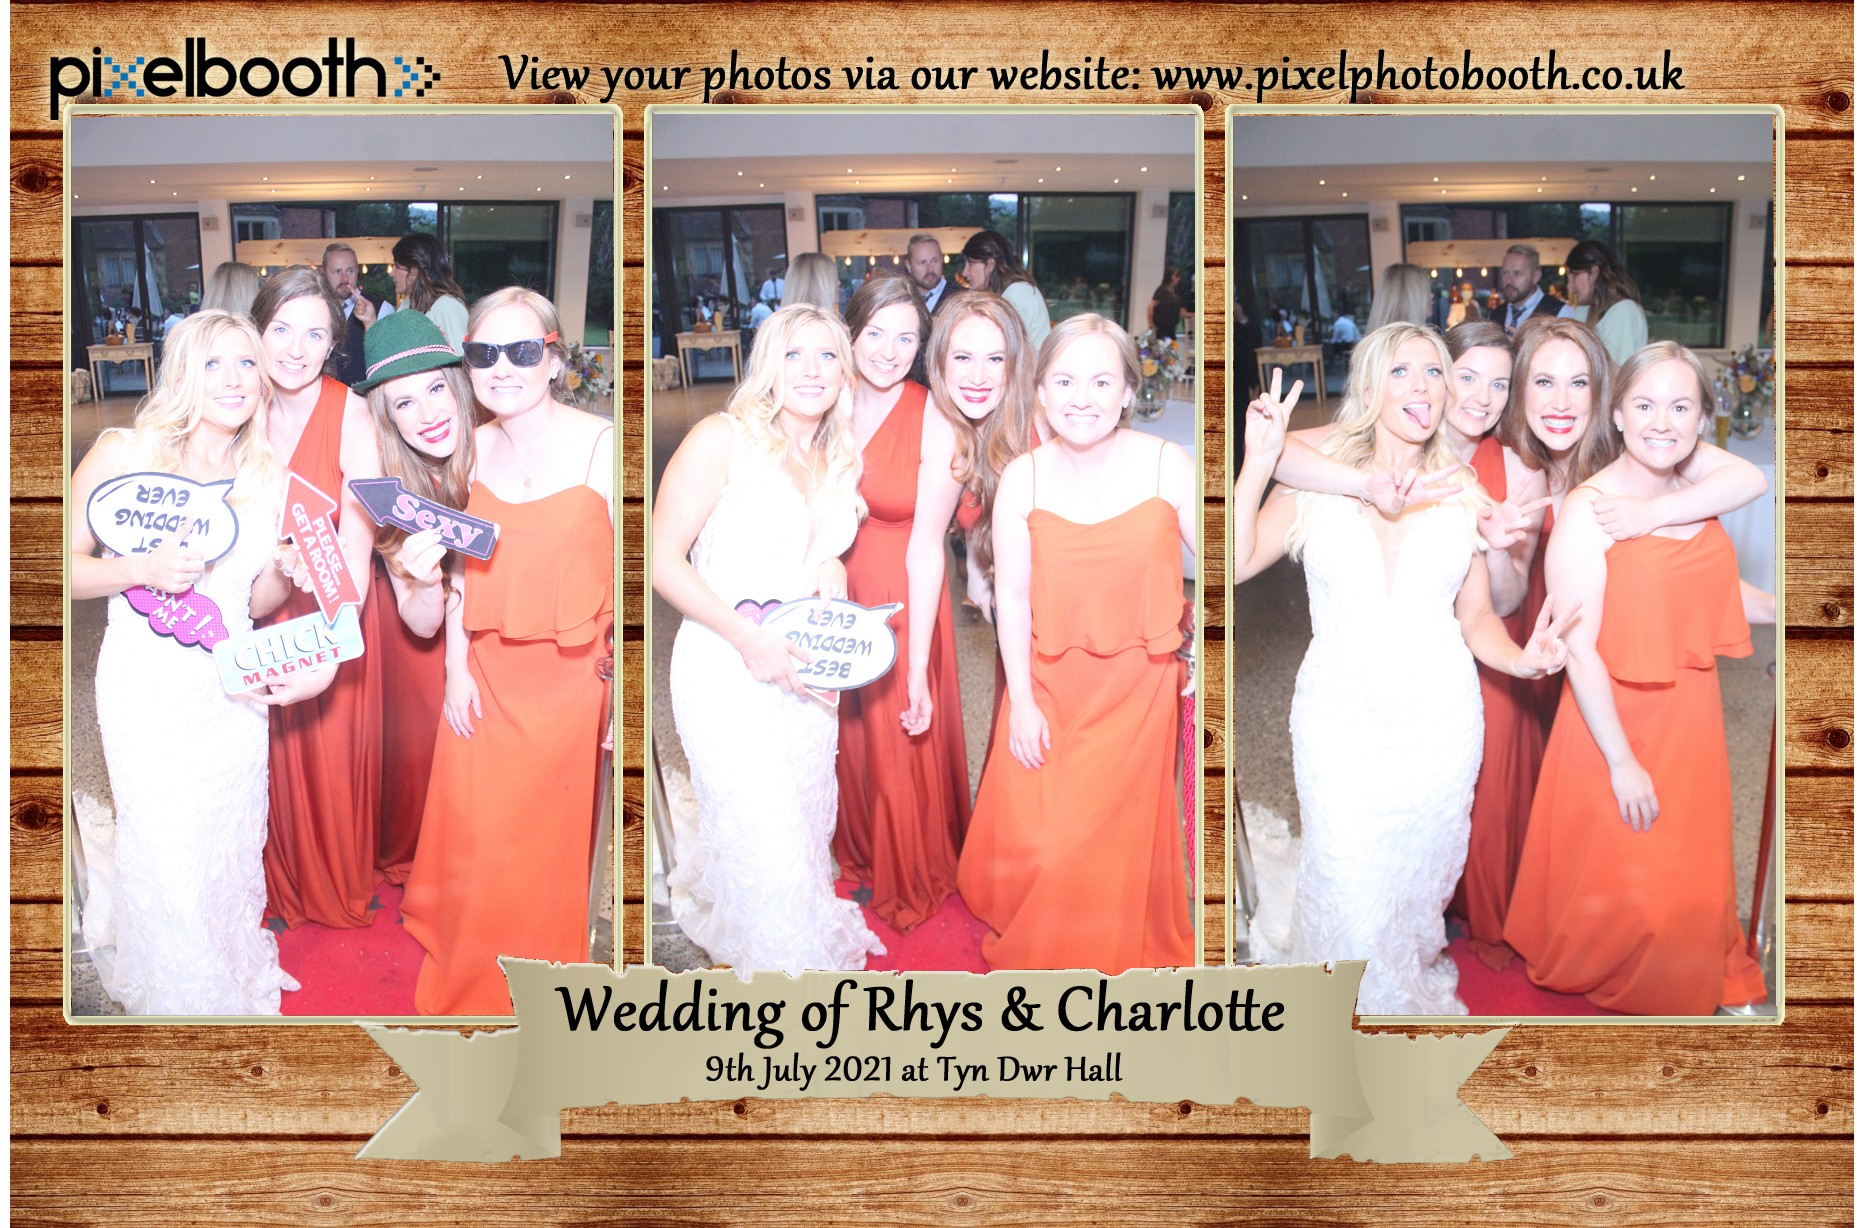 9th July 2021: Rhys and Charlotte's Wedding at Twn Dwr Hall